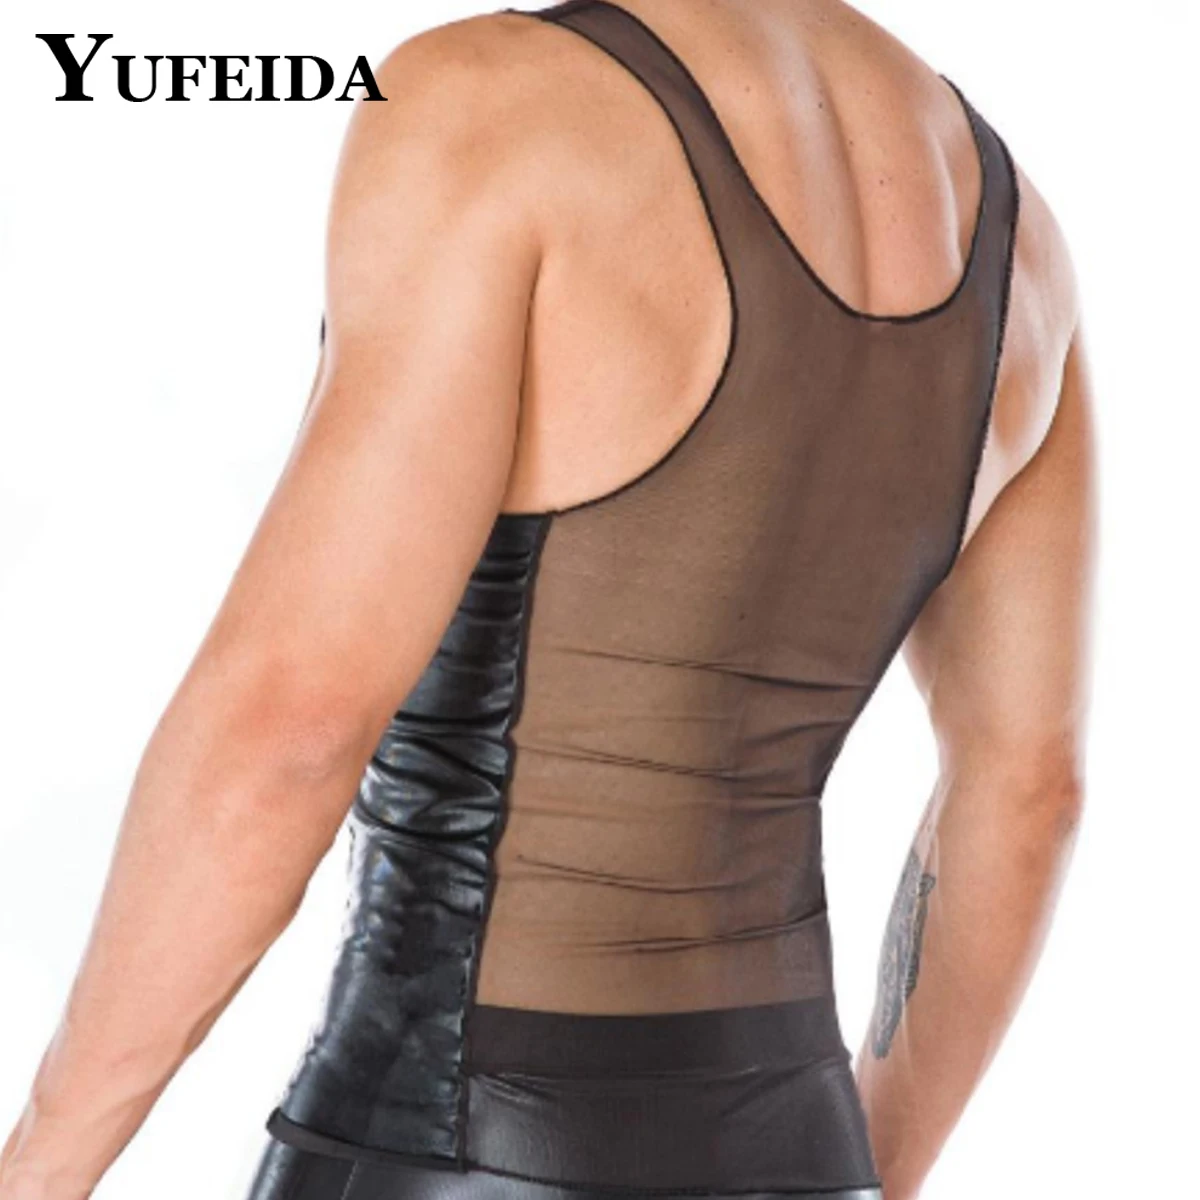 

YUFEIDA Men's Transparent Sheer Vest Sexy Stage Performance Costumes Gay Male Ultra Thin Mesh Tank Tops Fitness Gym Muscle Vests